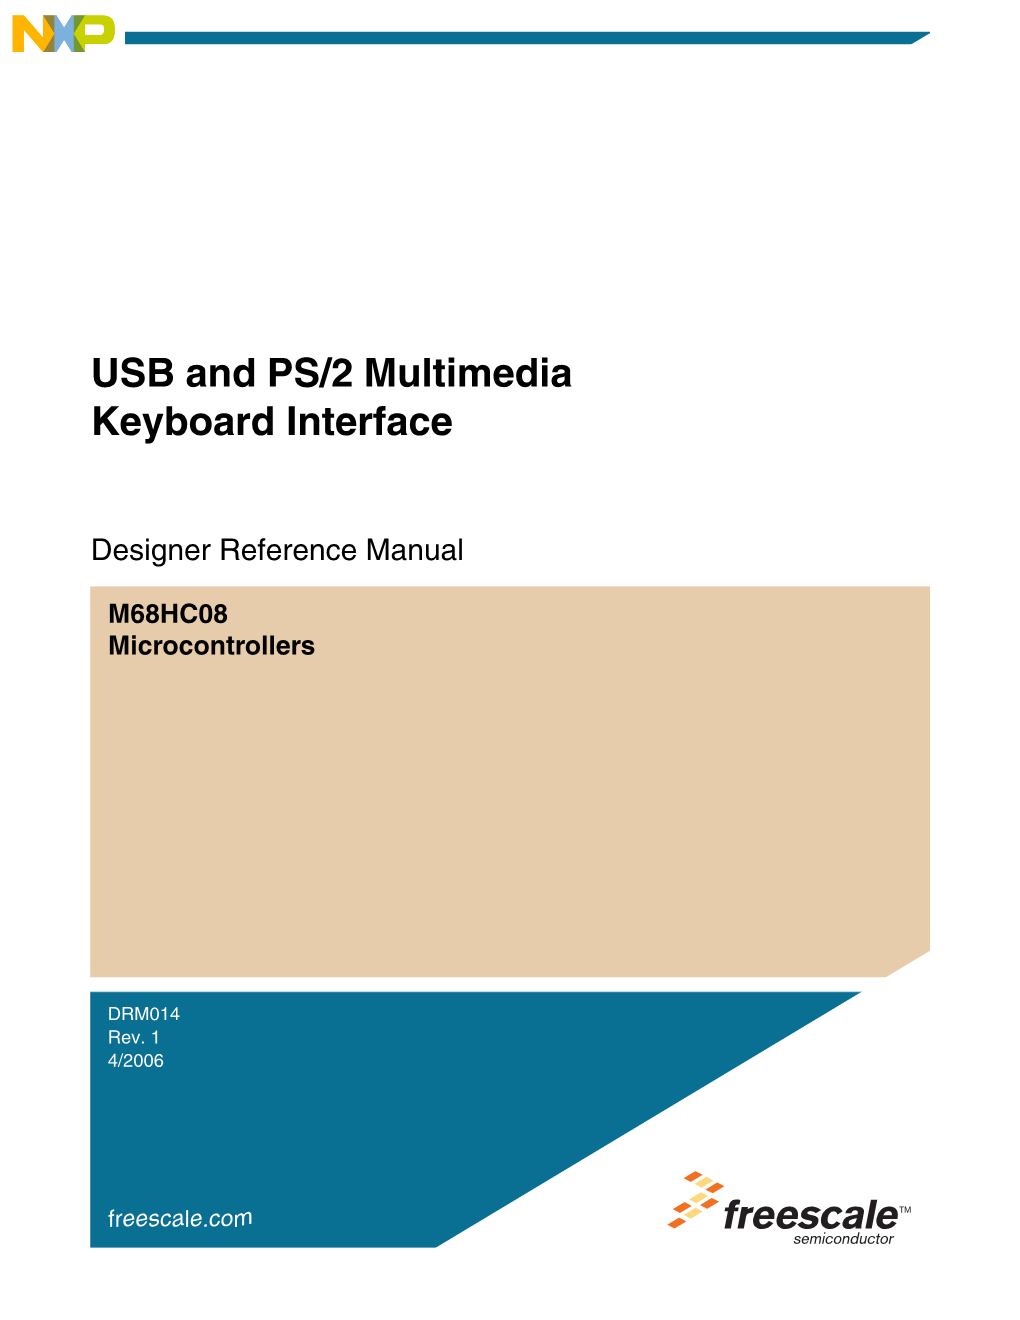 DRM014, USB and PS/2 Multimedia Keyboard Interface Designer